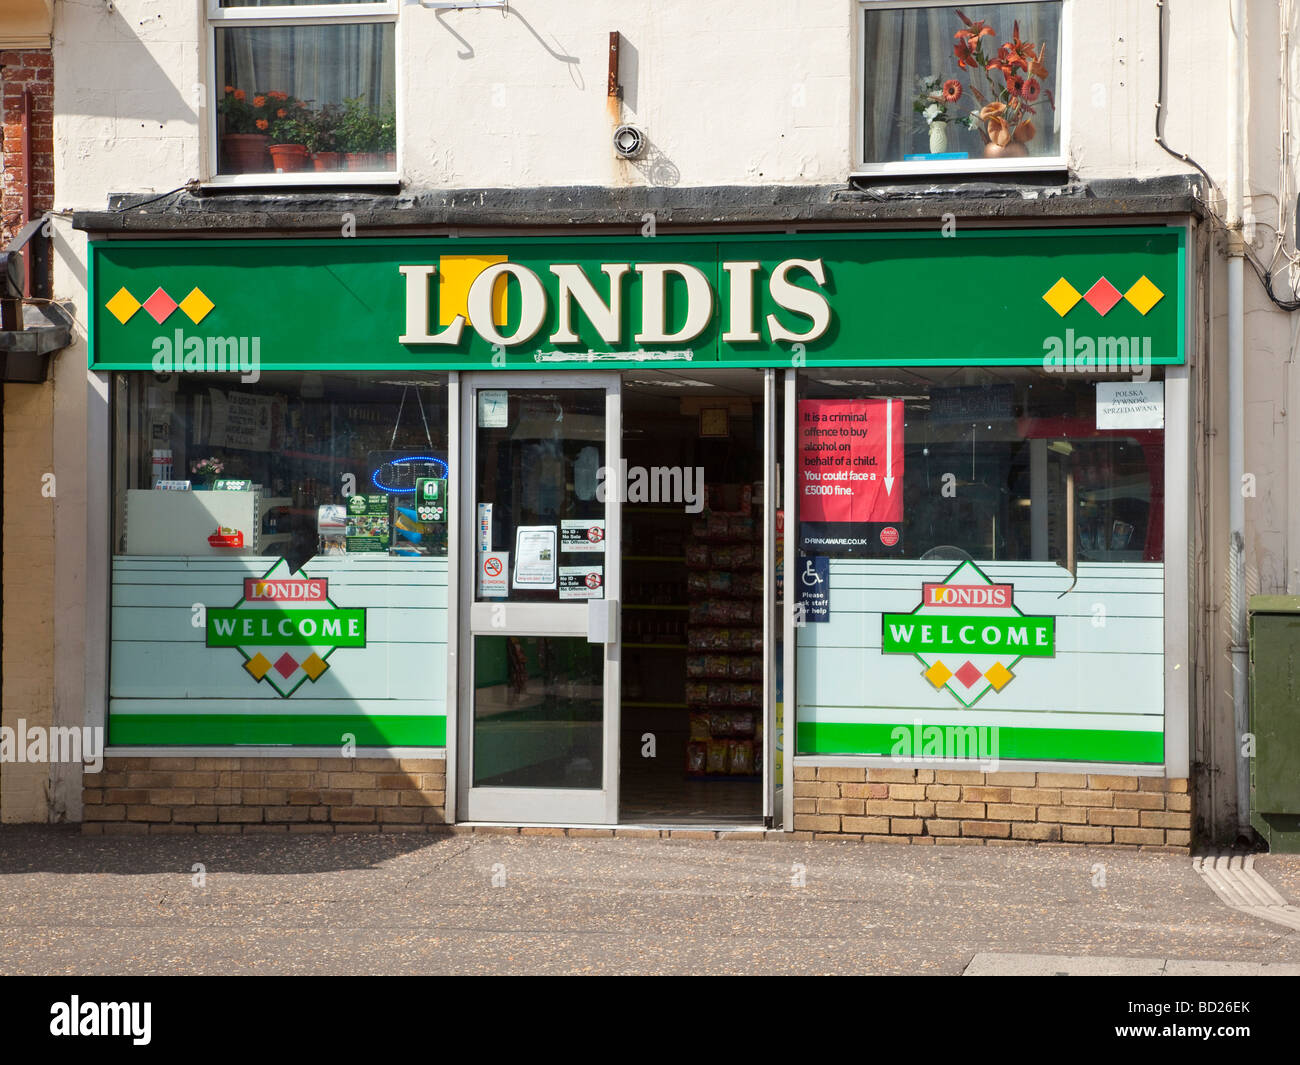 Londis convenience store Stock Photo